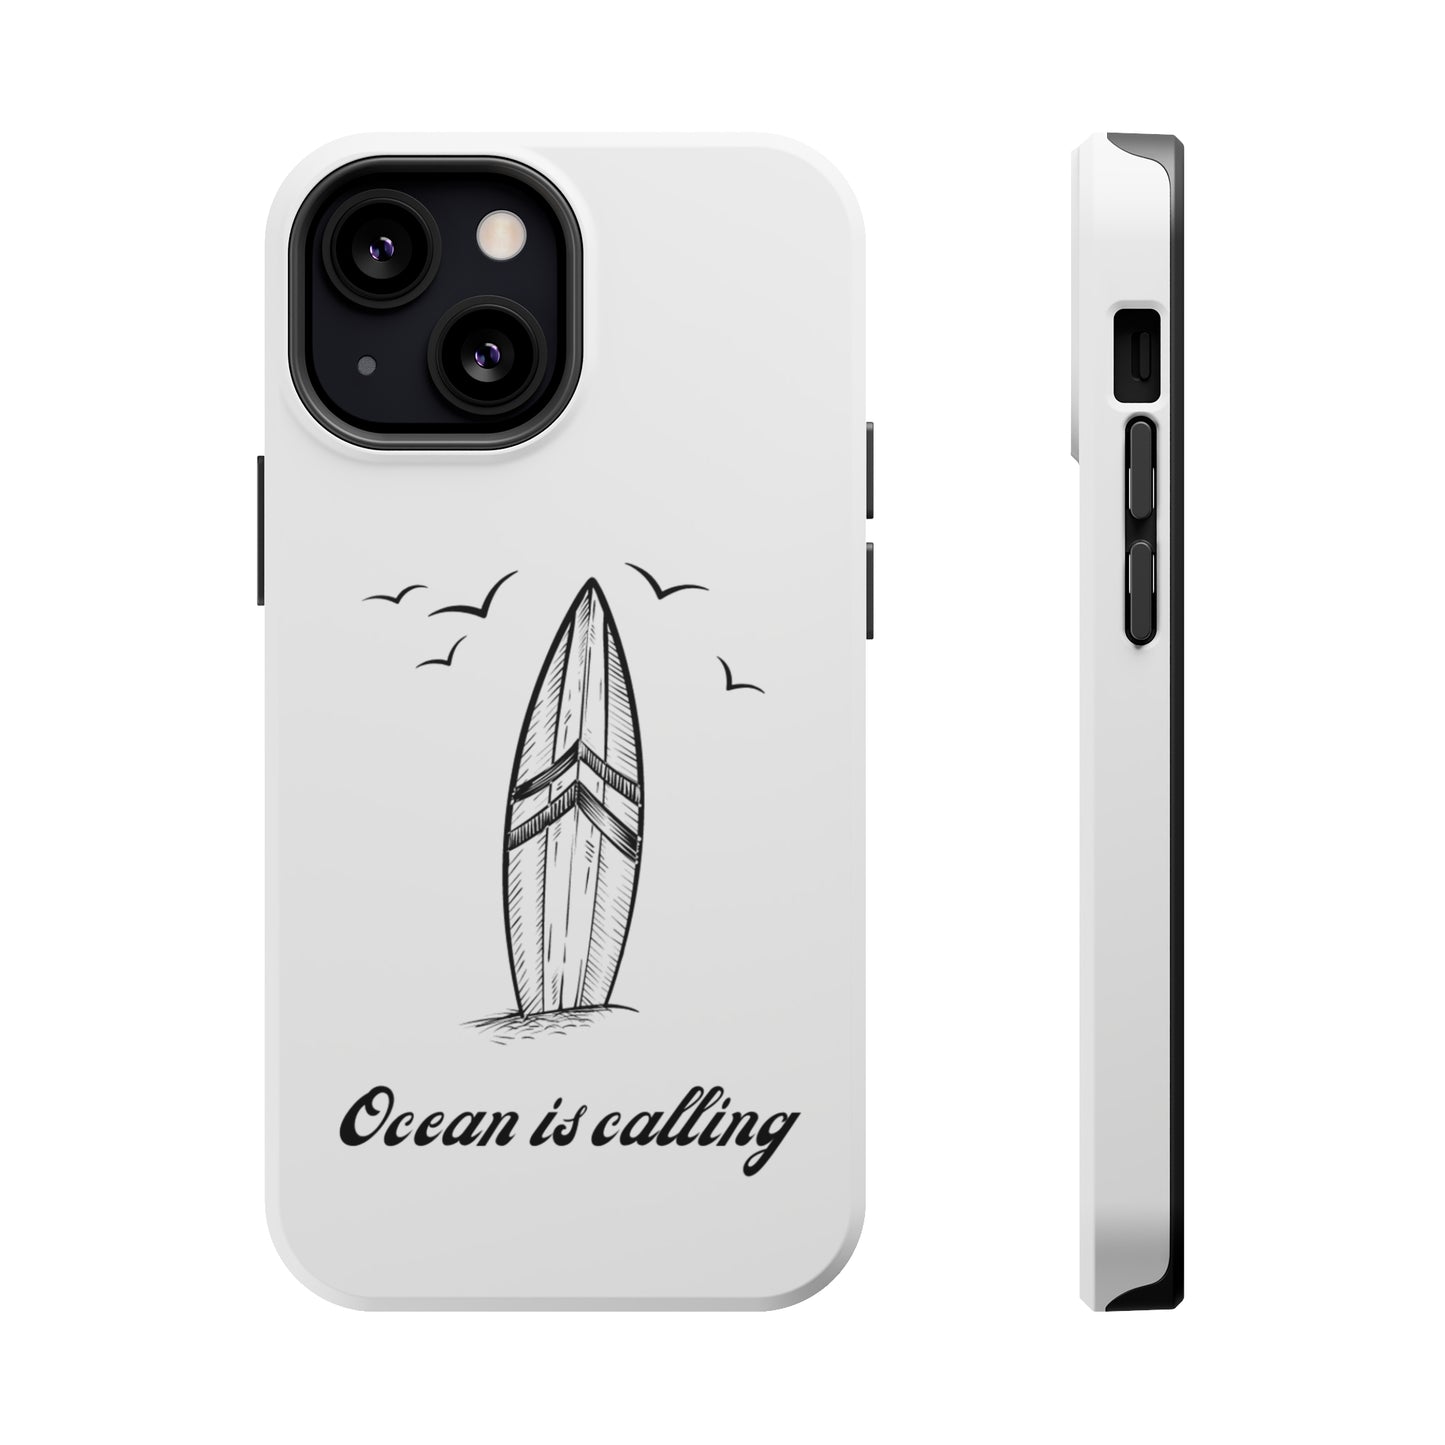 MagSafe iPhone ケース ・Ocean is calling